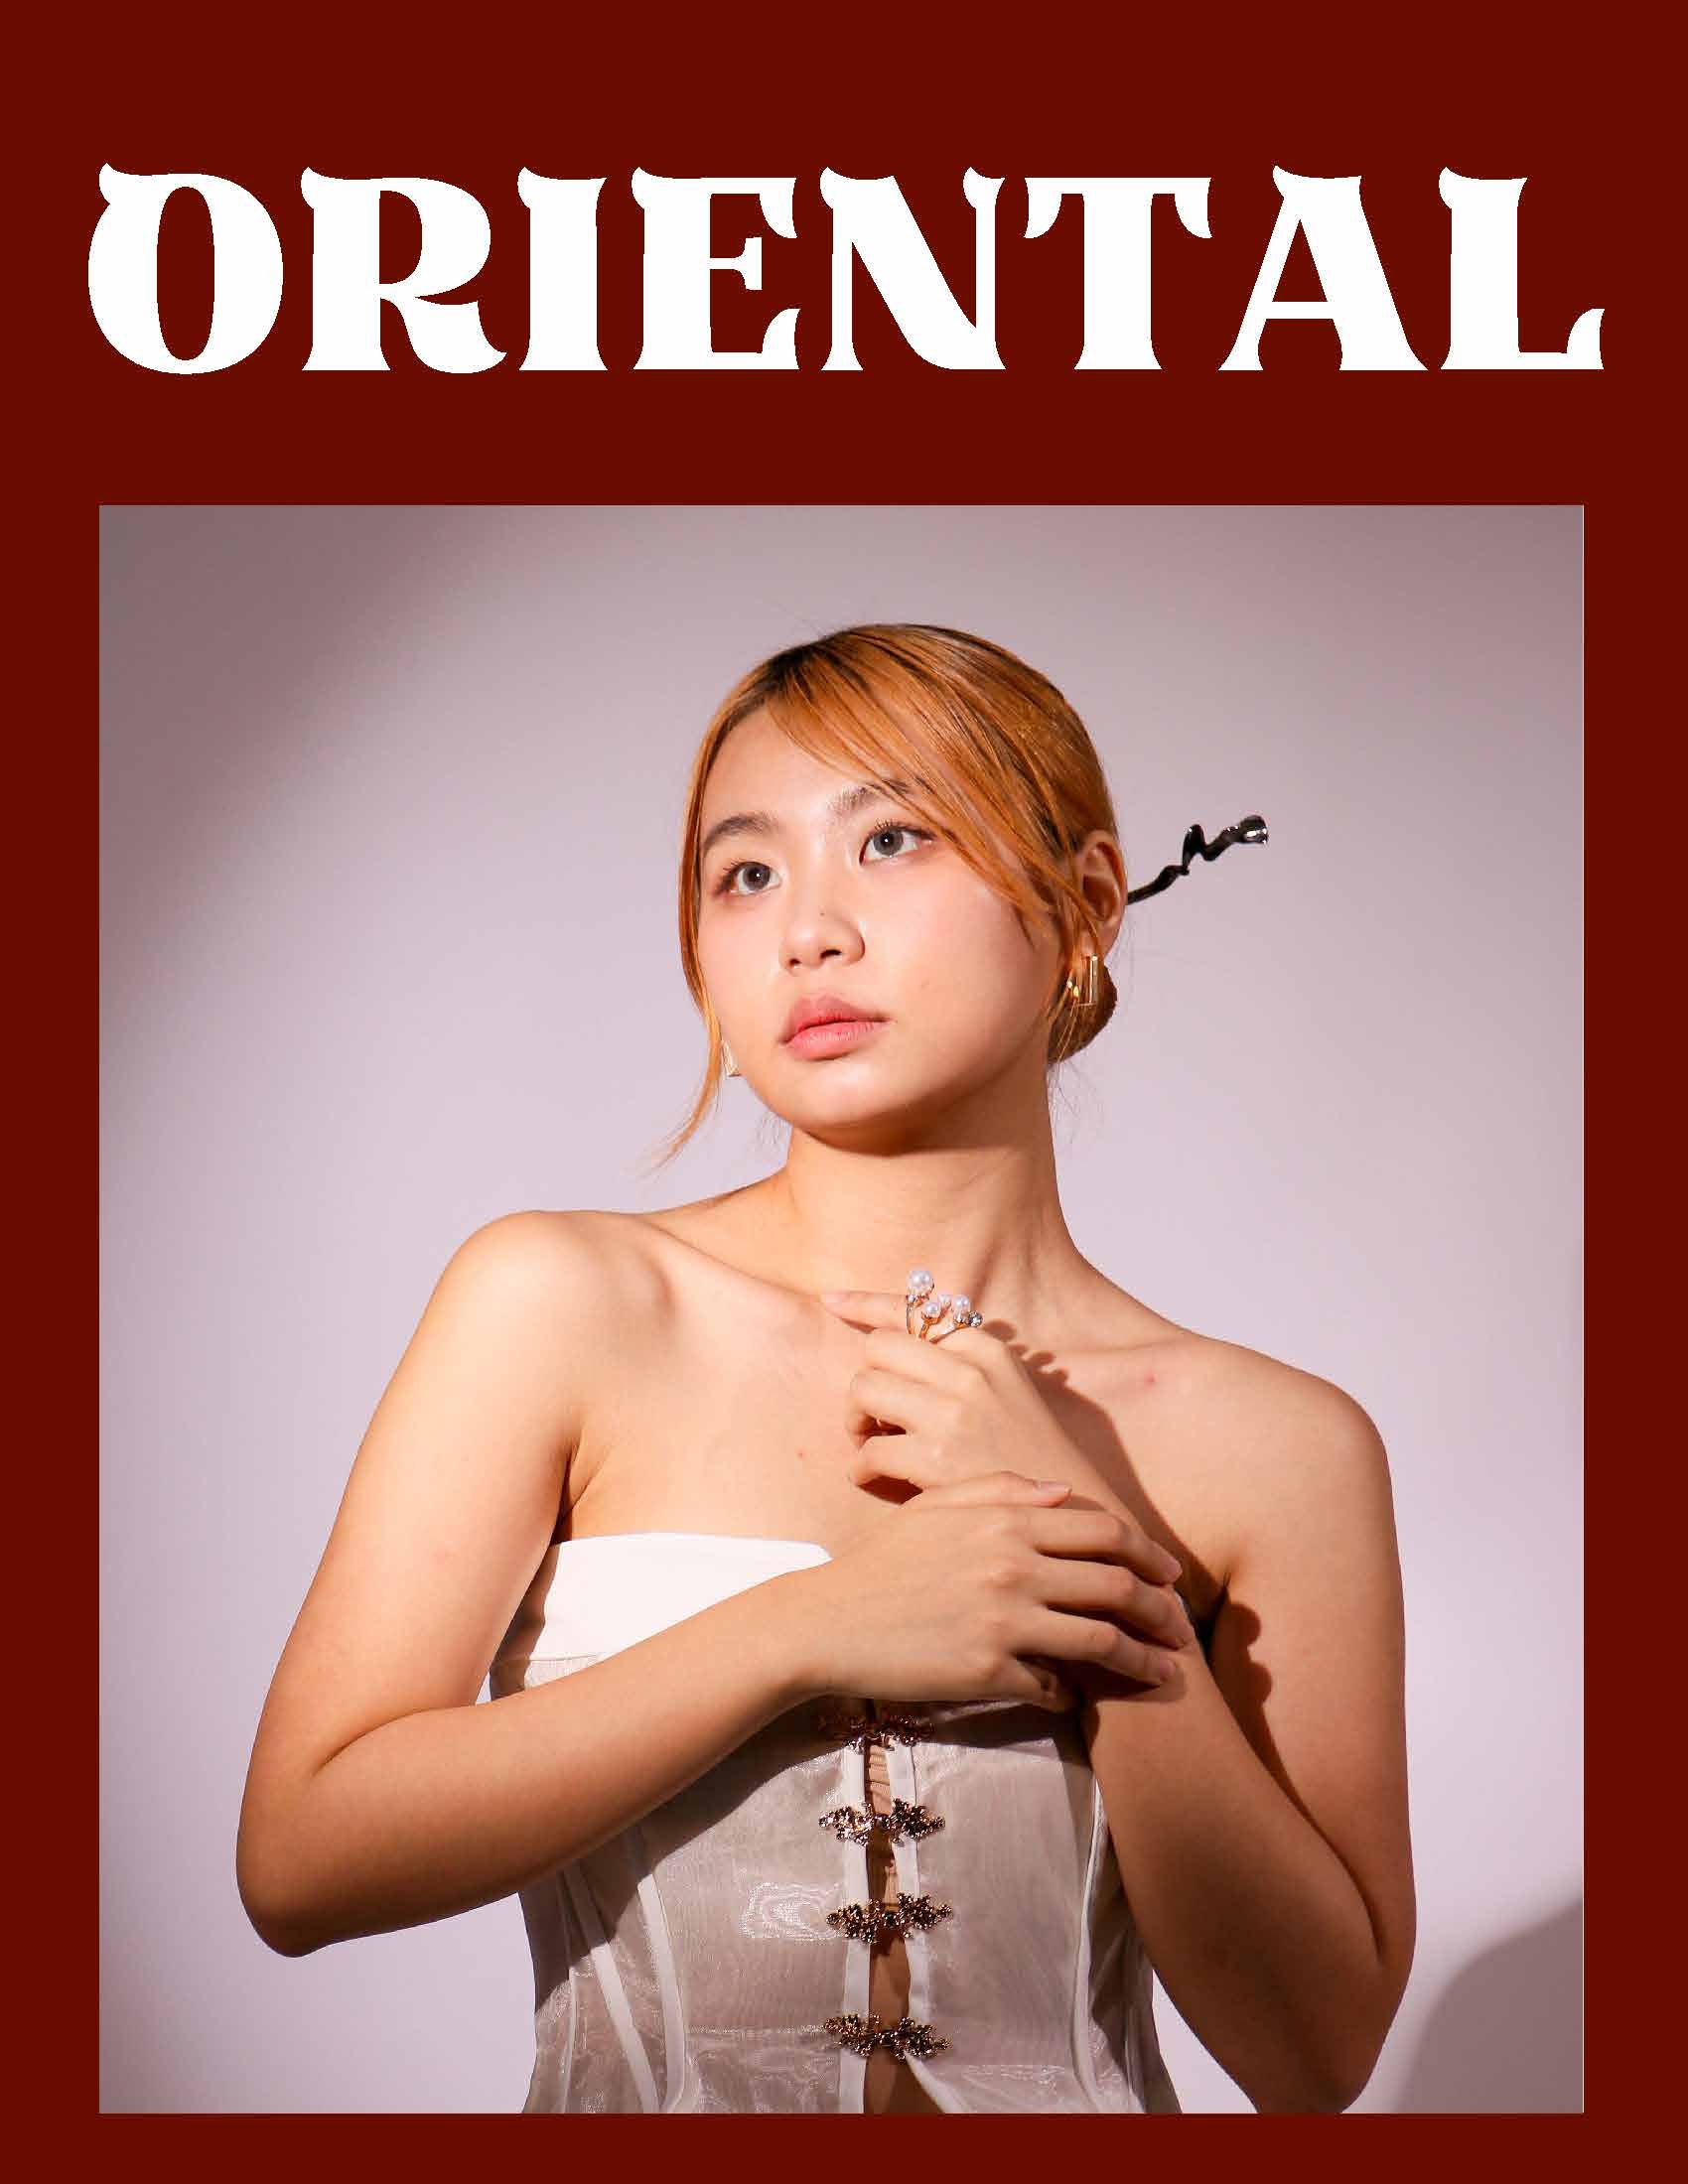 Read more about the article The Oriental Woman by Yeung, Marilyn